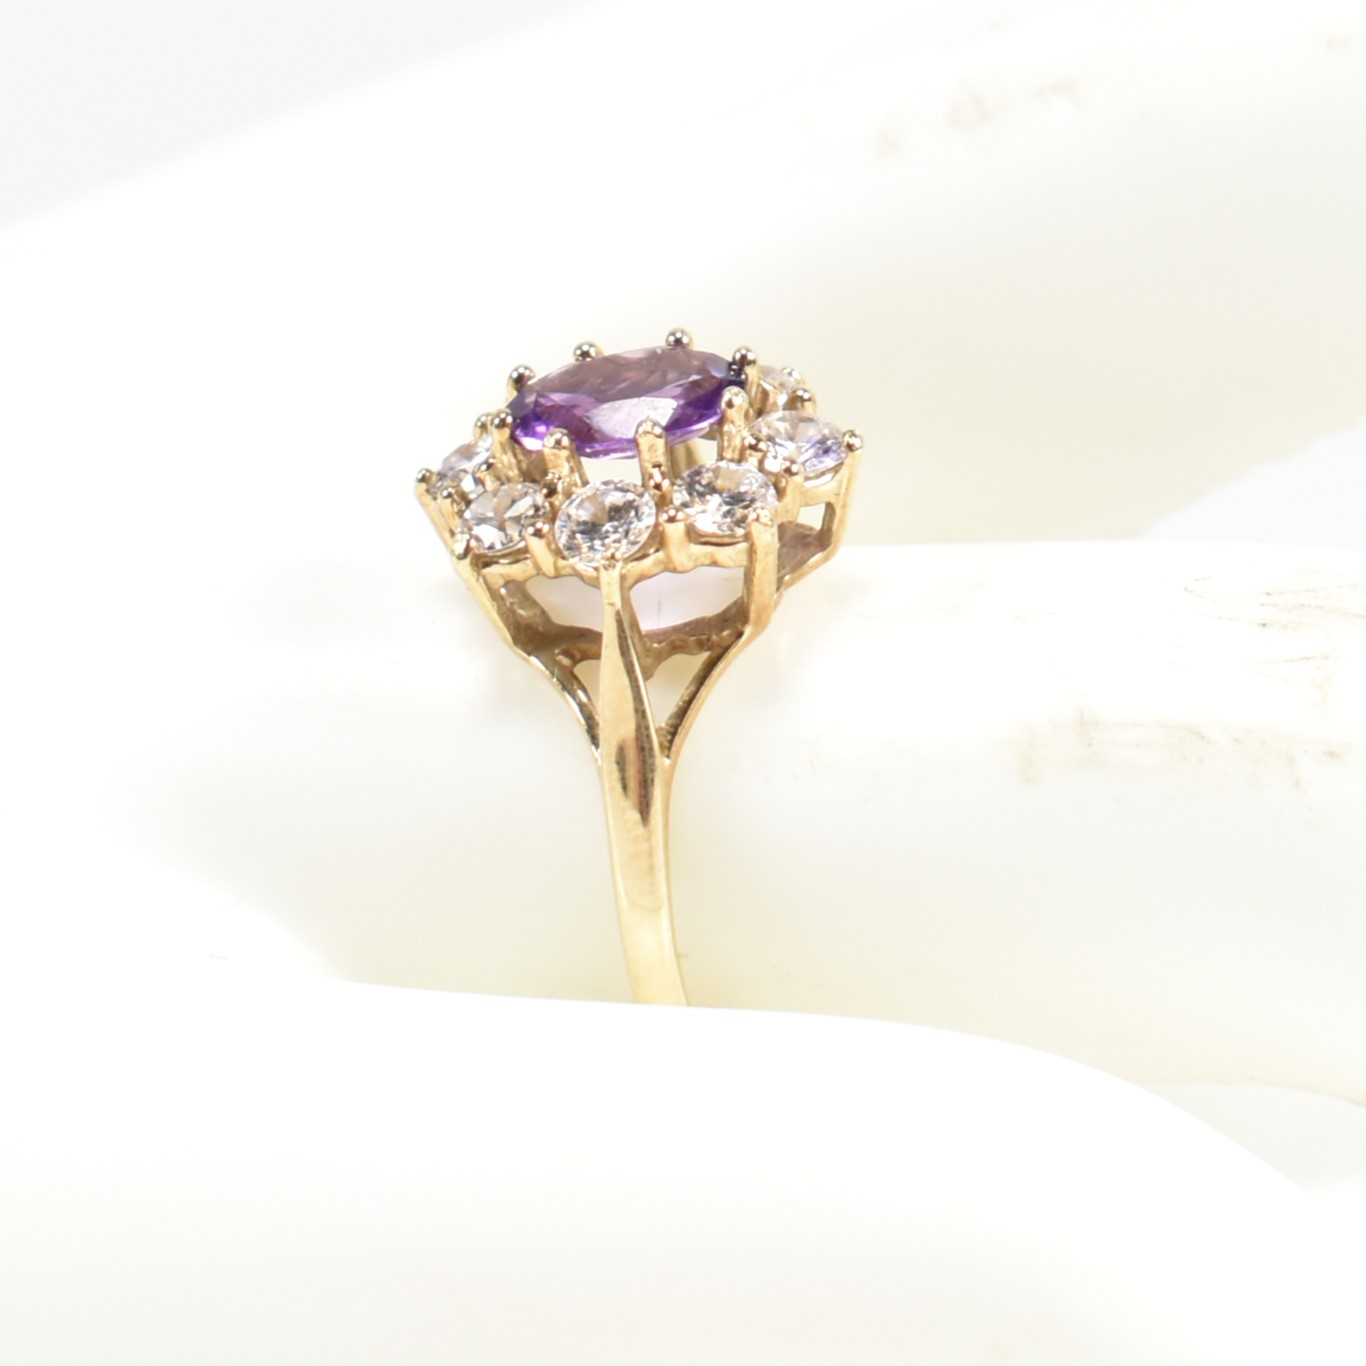 HALLMARKED 9CT GOLD AMETHYST & WHITE STONE CLUSTER RING - Image 8 of 9